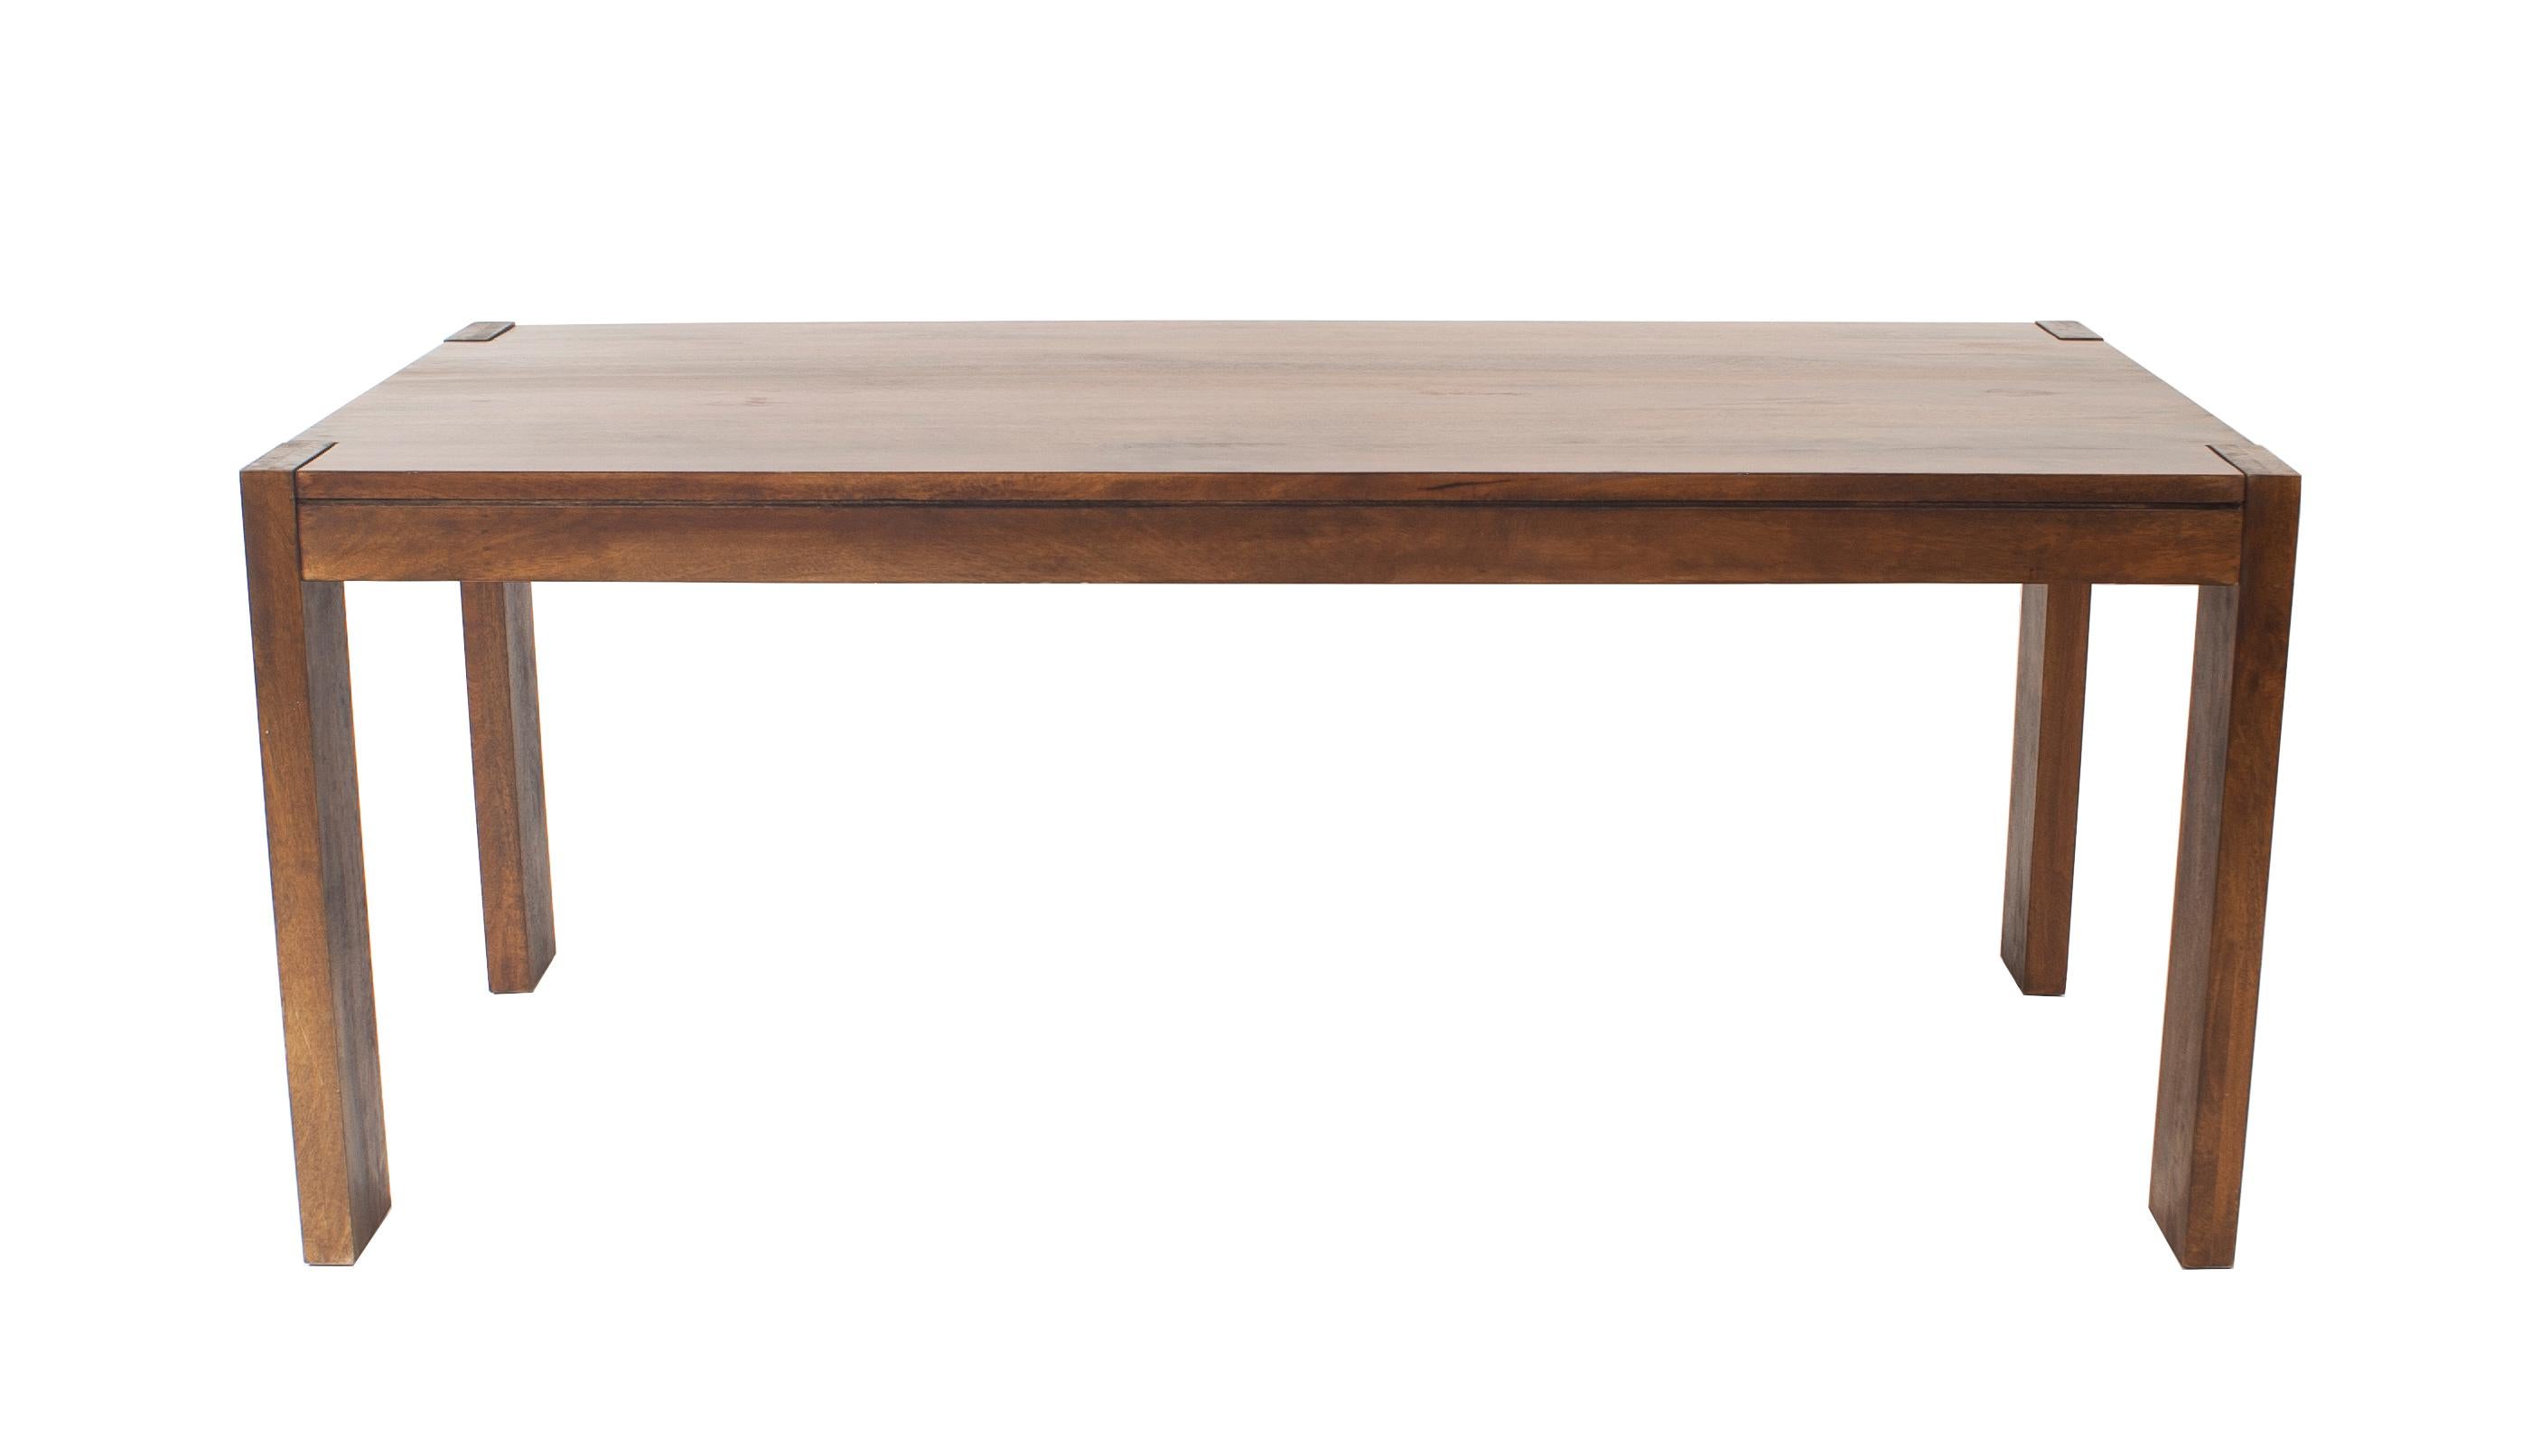 American Mission-style walnut dining / conference table with rectangular top and straight post legs.
